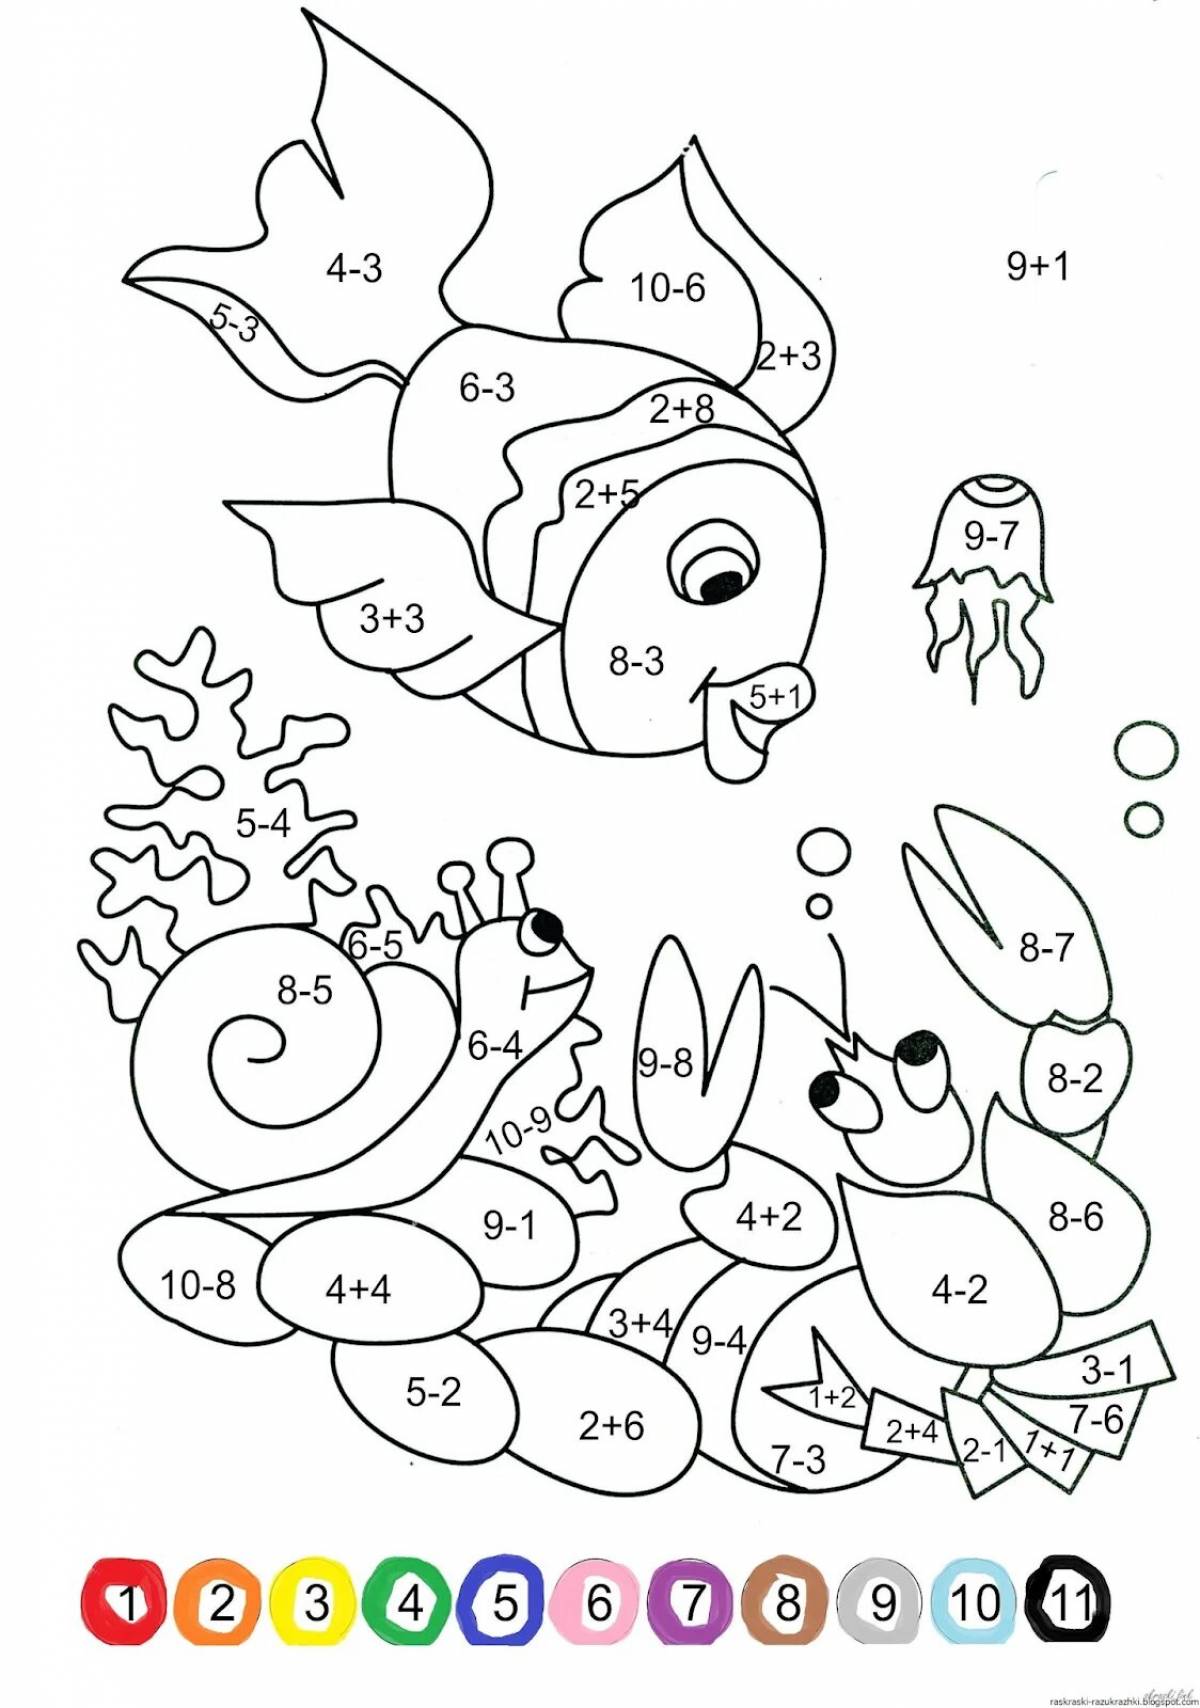 Refreshing addition and subtraction coloring page